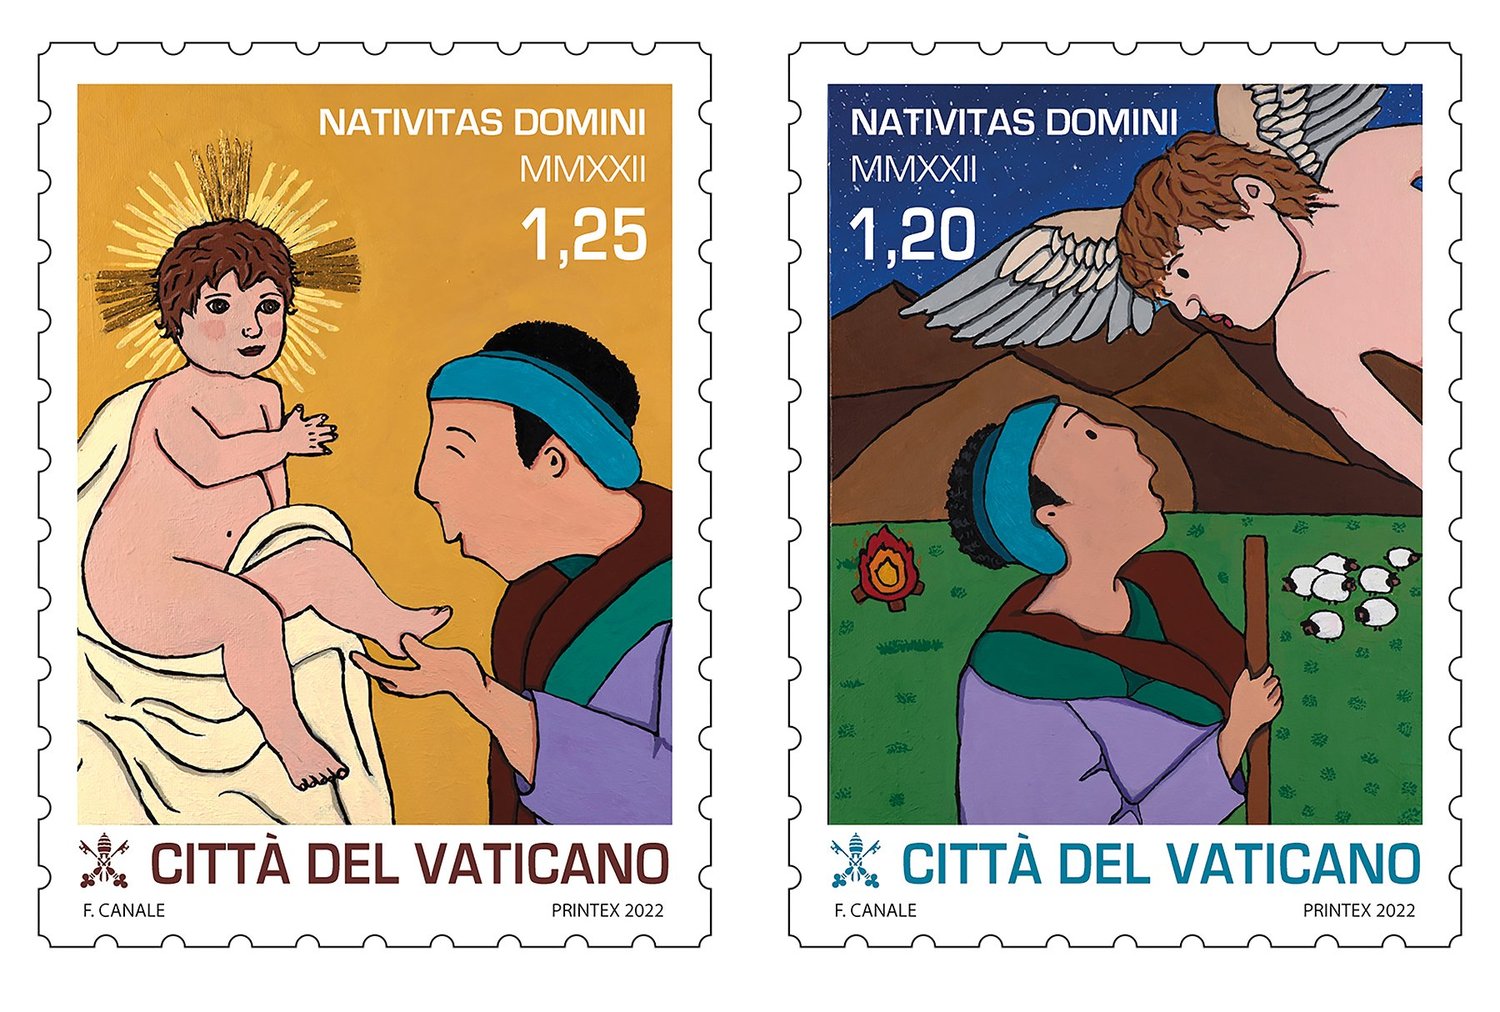 These two Vatican Christmas stamps were painted by Francesco Canale, an artist born without arms or legs who paints holding a brush between his teeth. The €1.20 Christmas stamps will go on sale at the Vatican post office Nov. 16, 2022